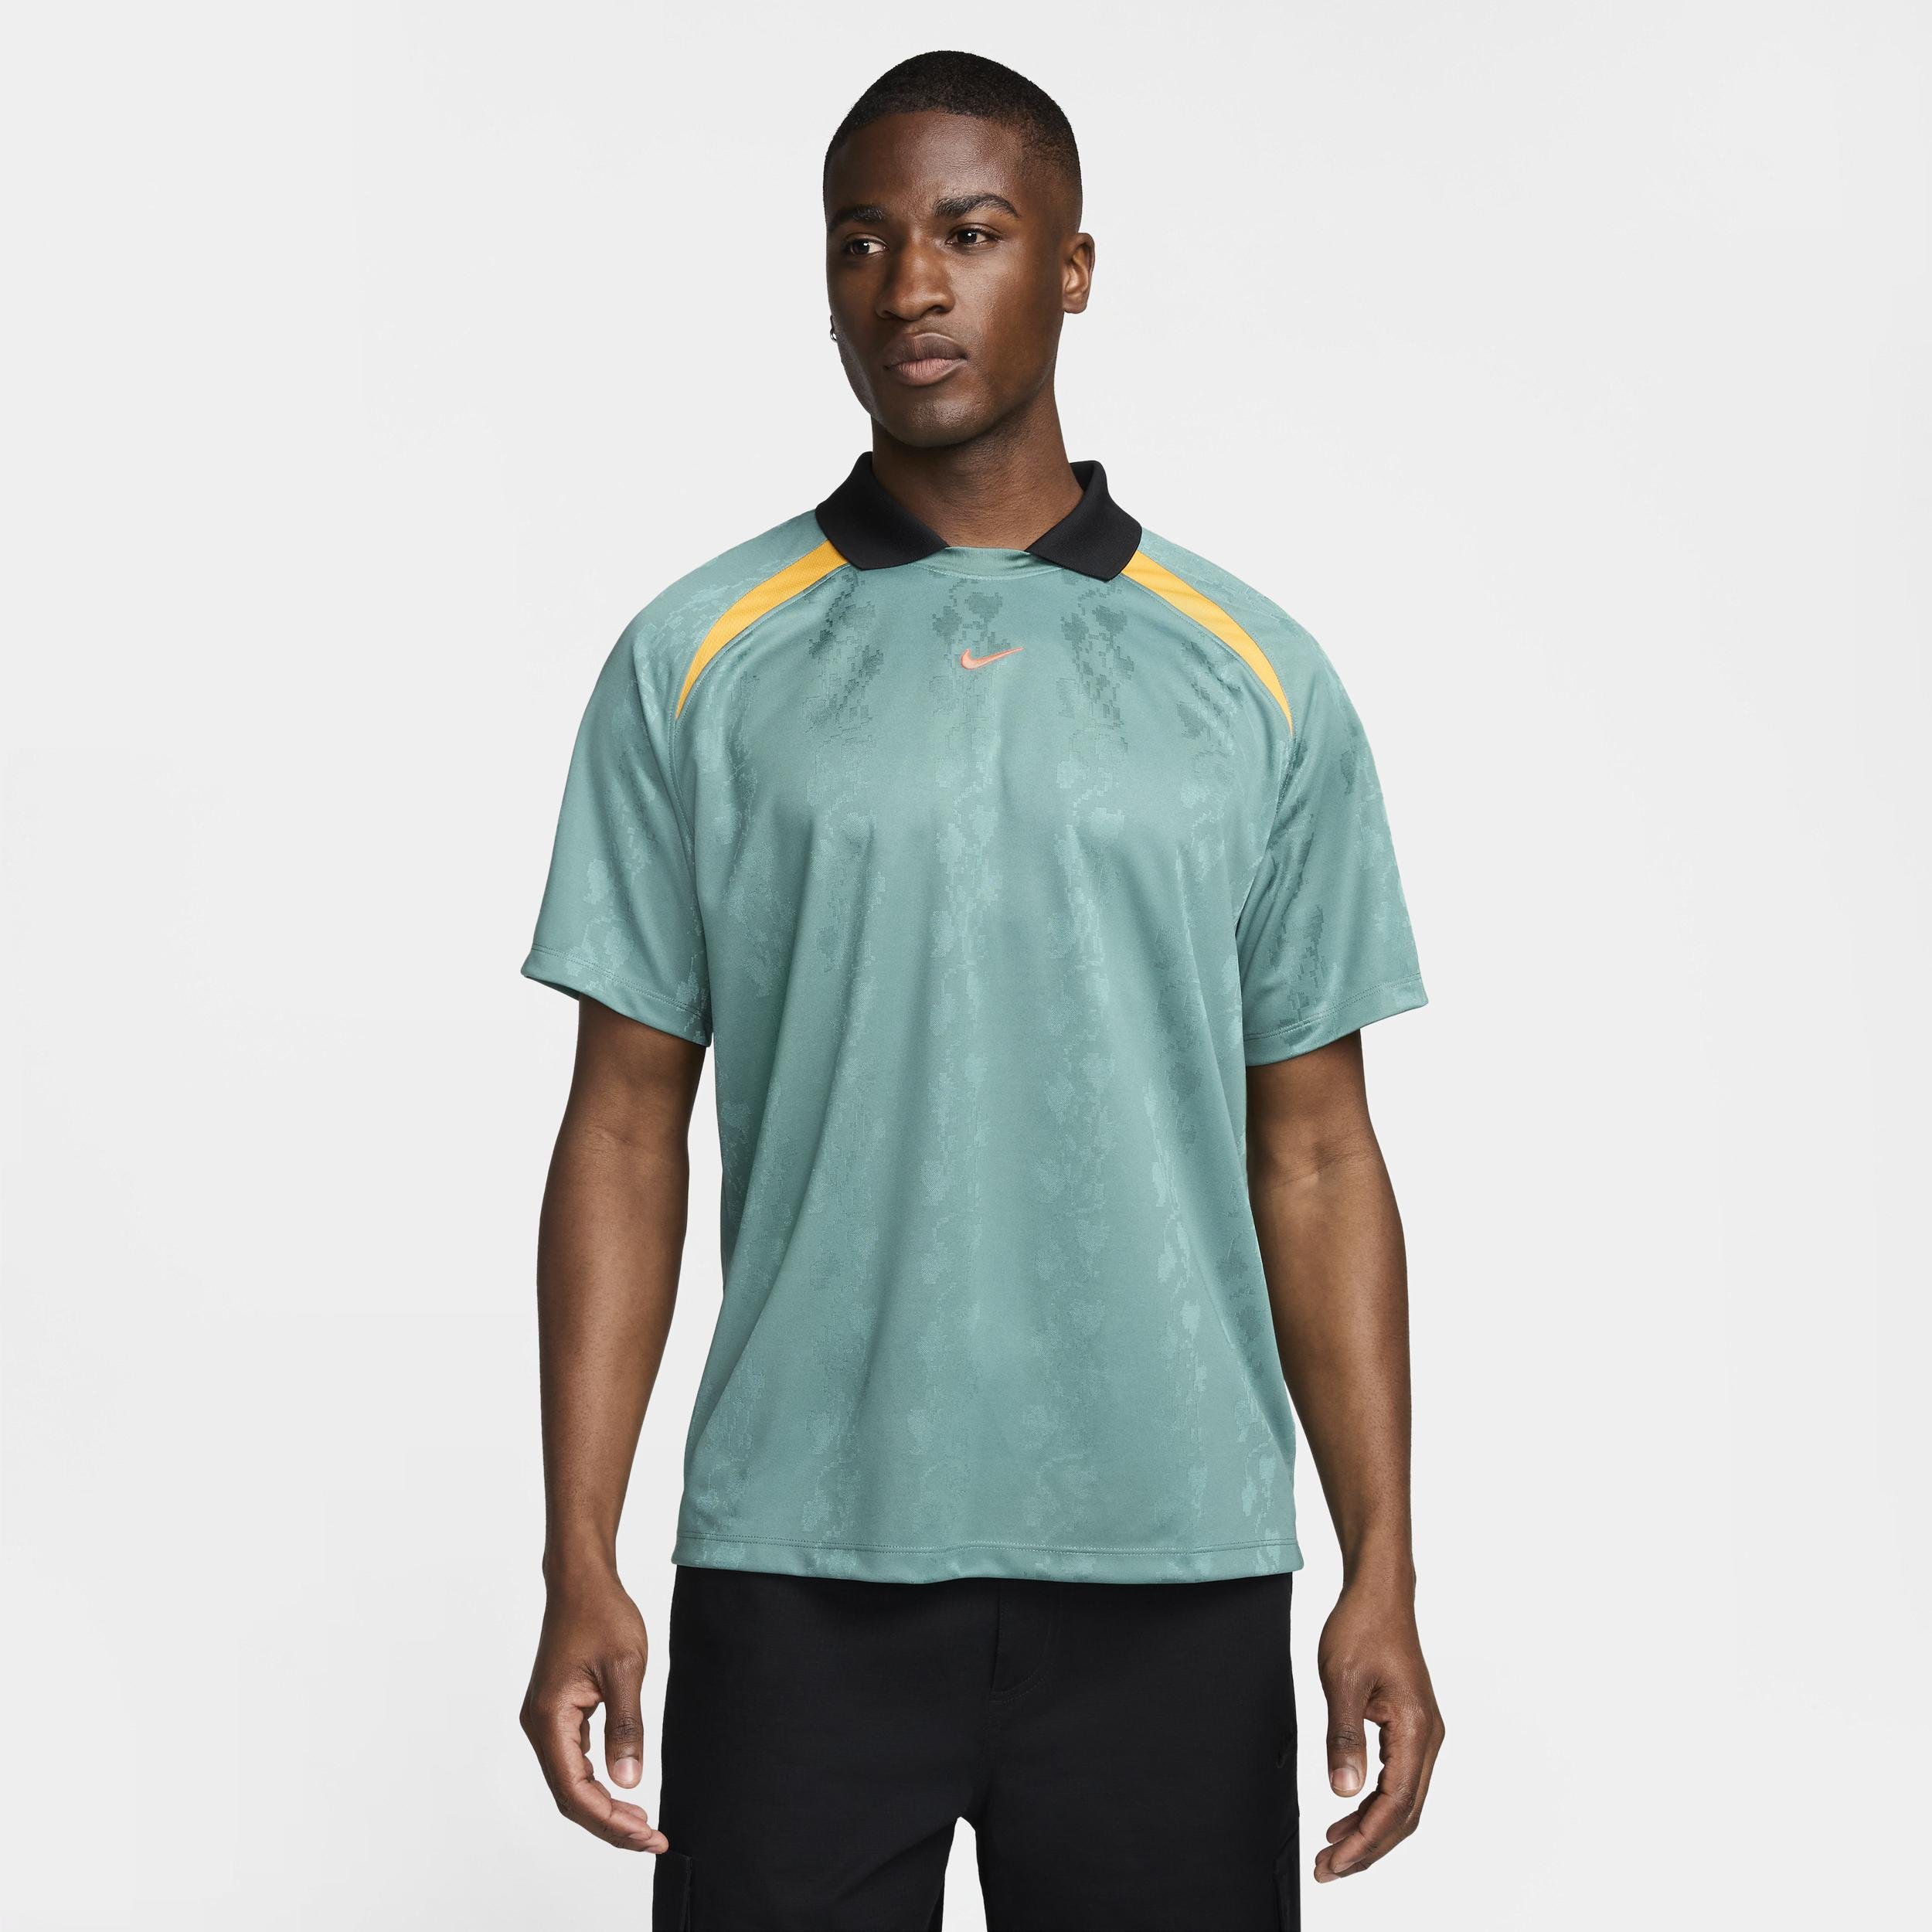 Nike Men's Culture of Football Dri-FIT Short-Sleeve Soccer Jersey by NIKE